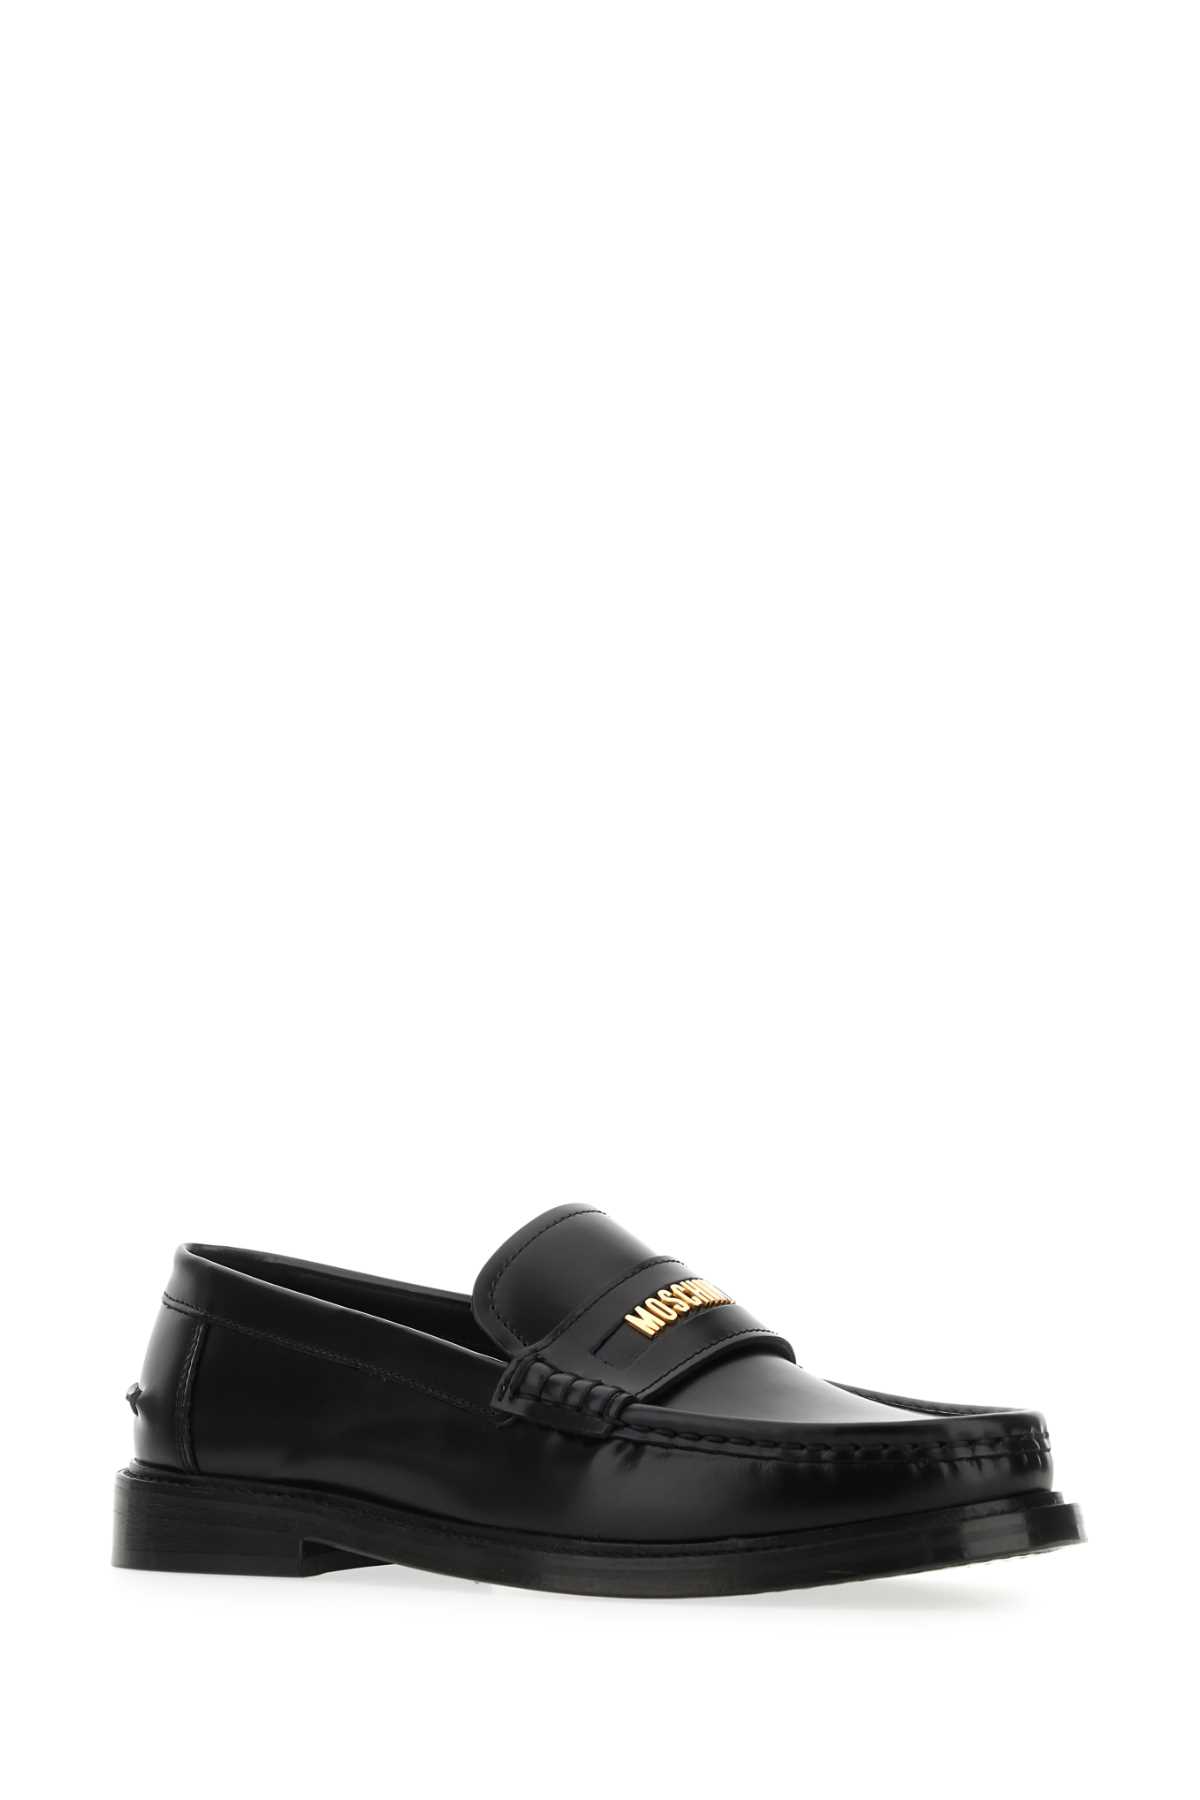 Moschino Black Leather Loafers In 000